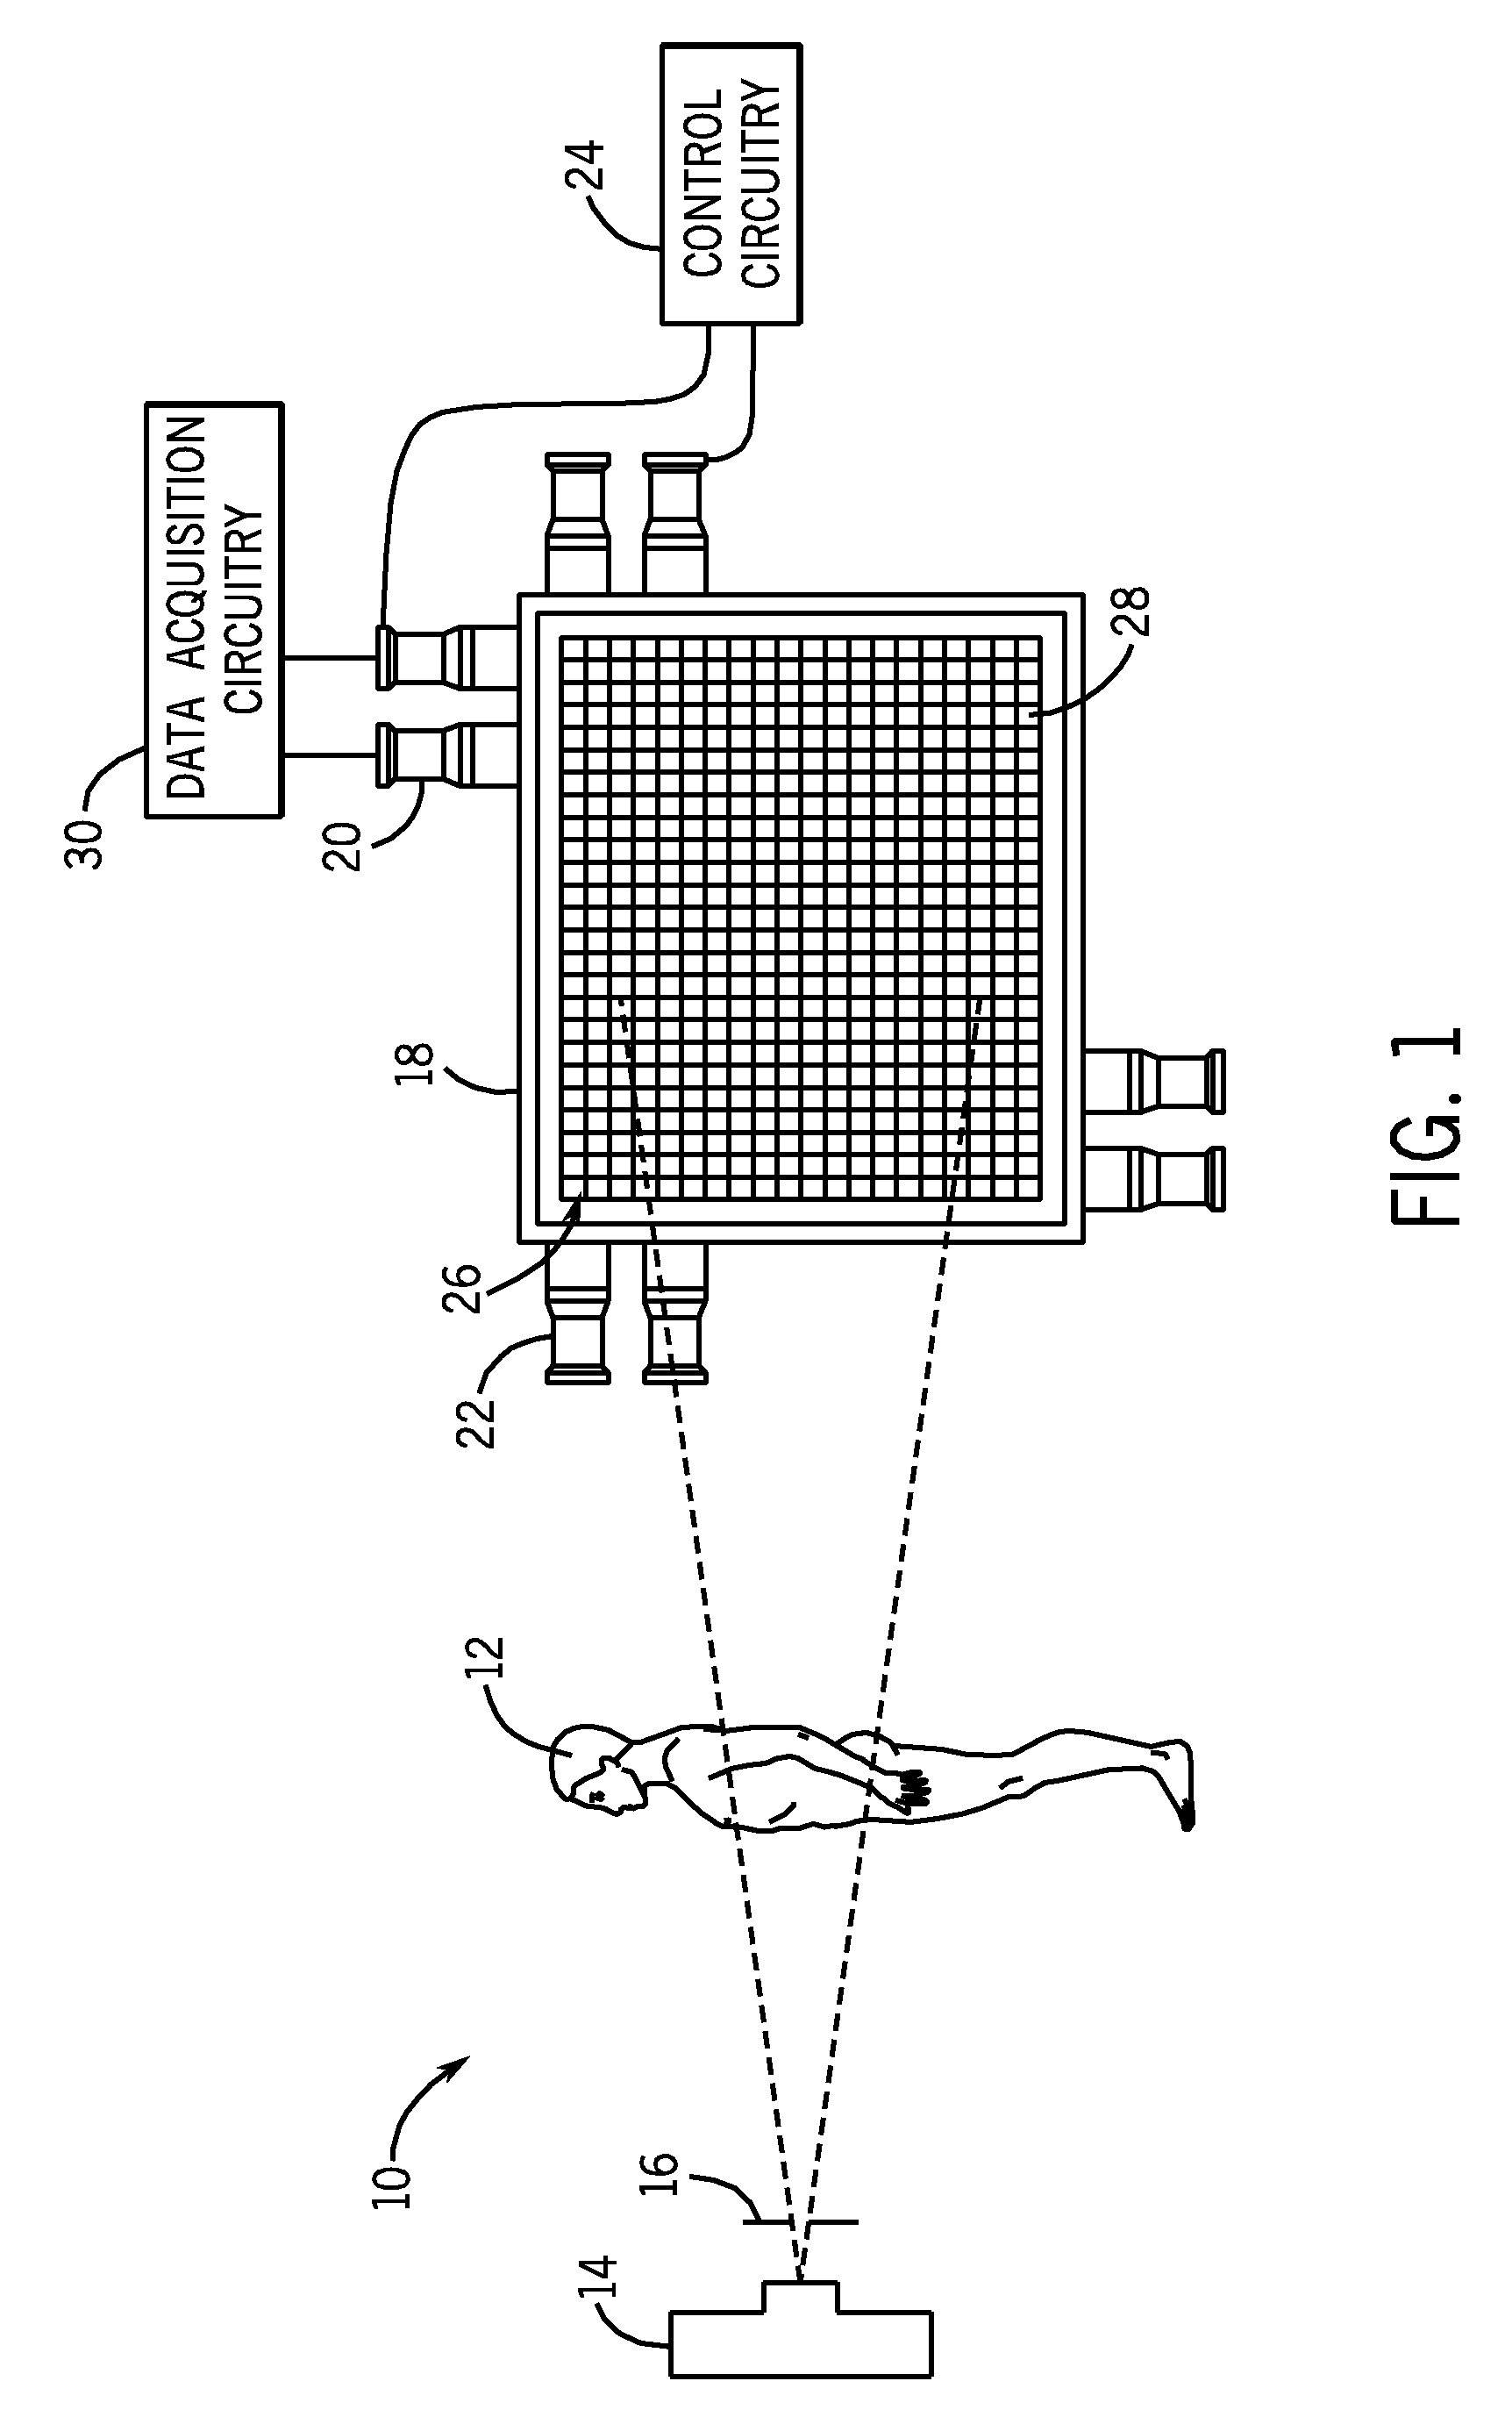 Low-noise data acquisition system for medical imaging